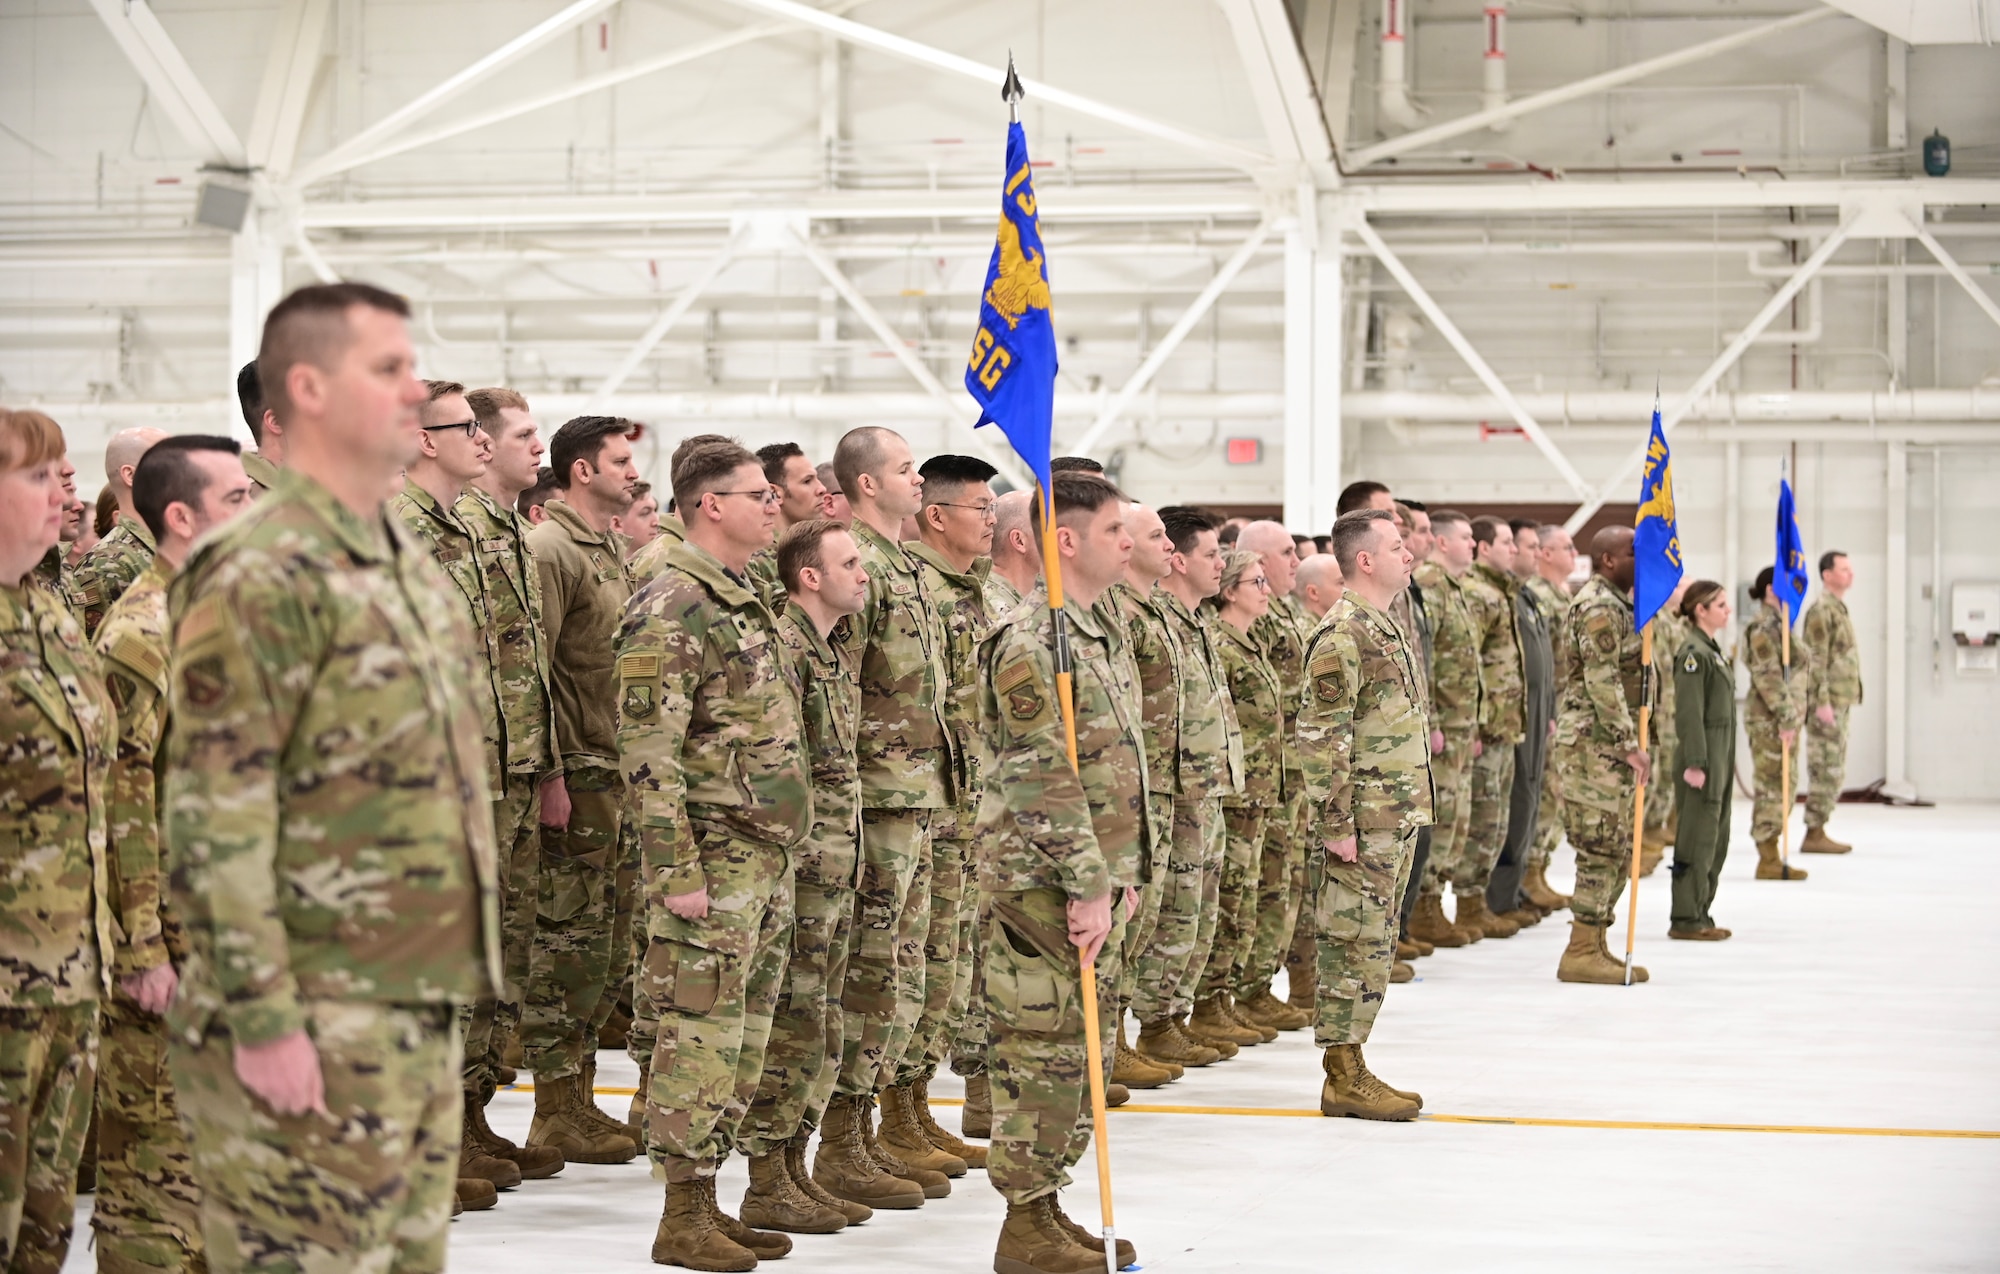 U.S. Air Force Airmen from the 133rd Airlift Wing stand in formation during the change of command ceremony in St. Paul, Minn., March 4, 2023.